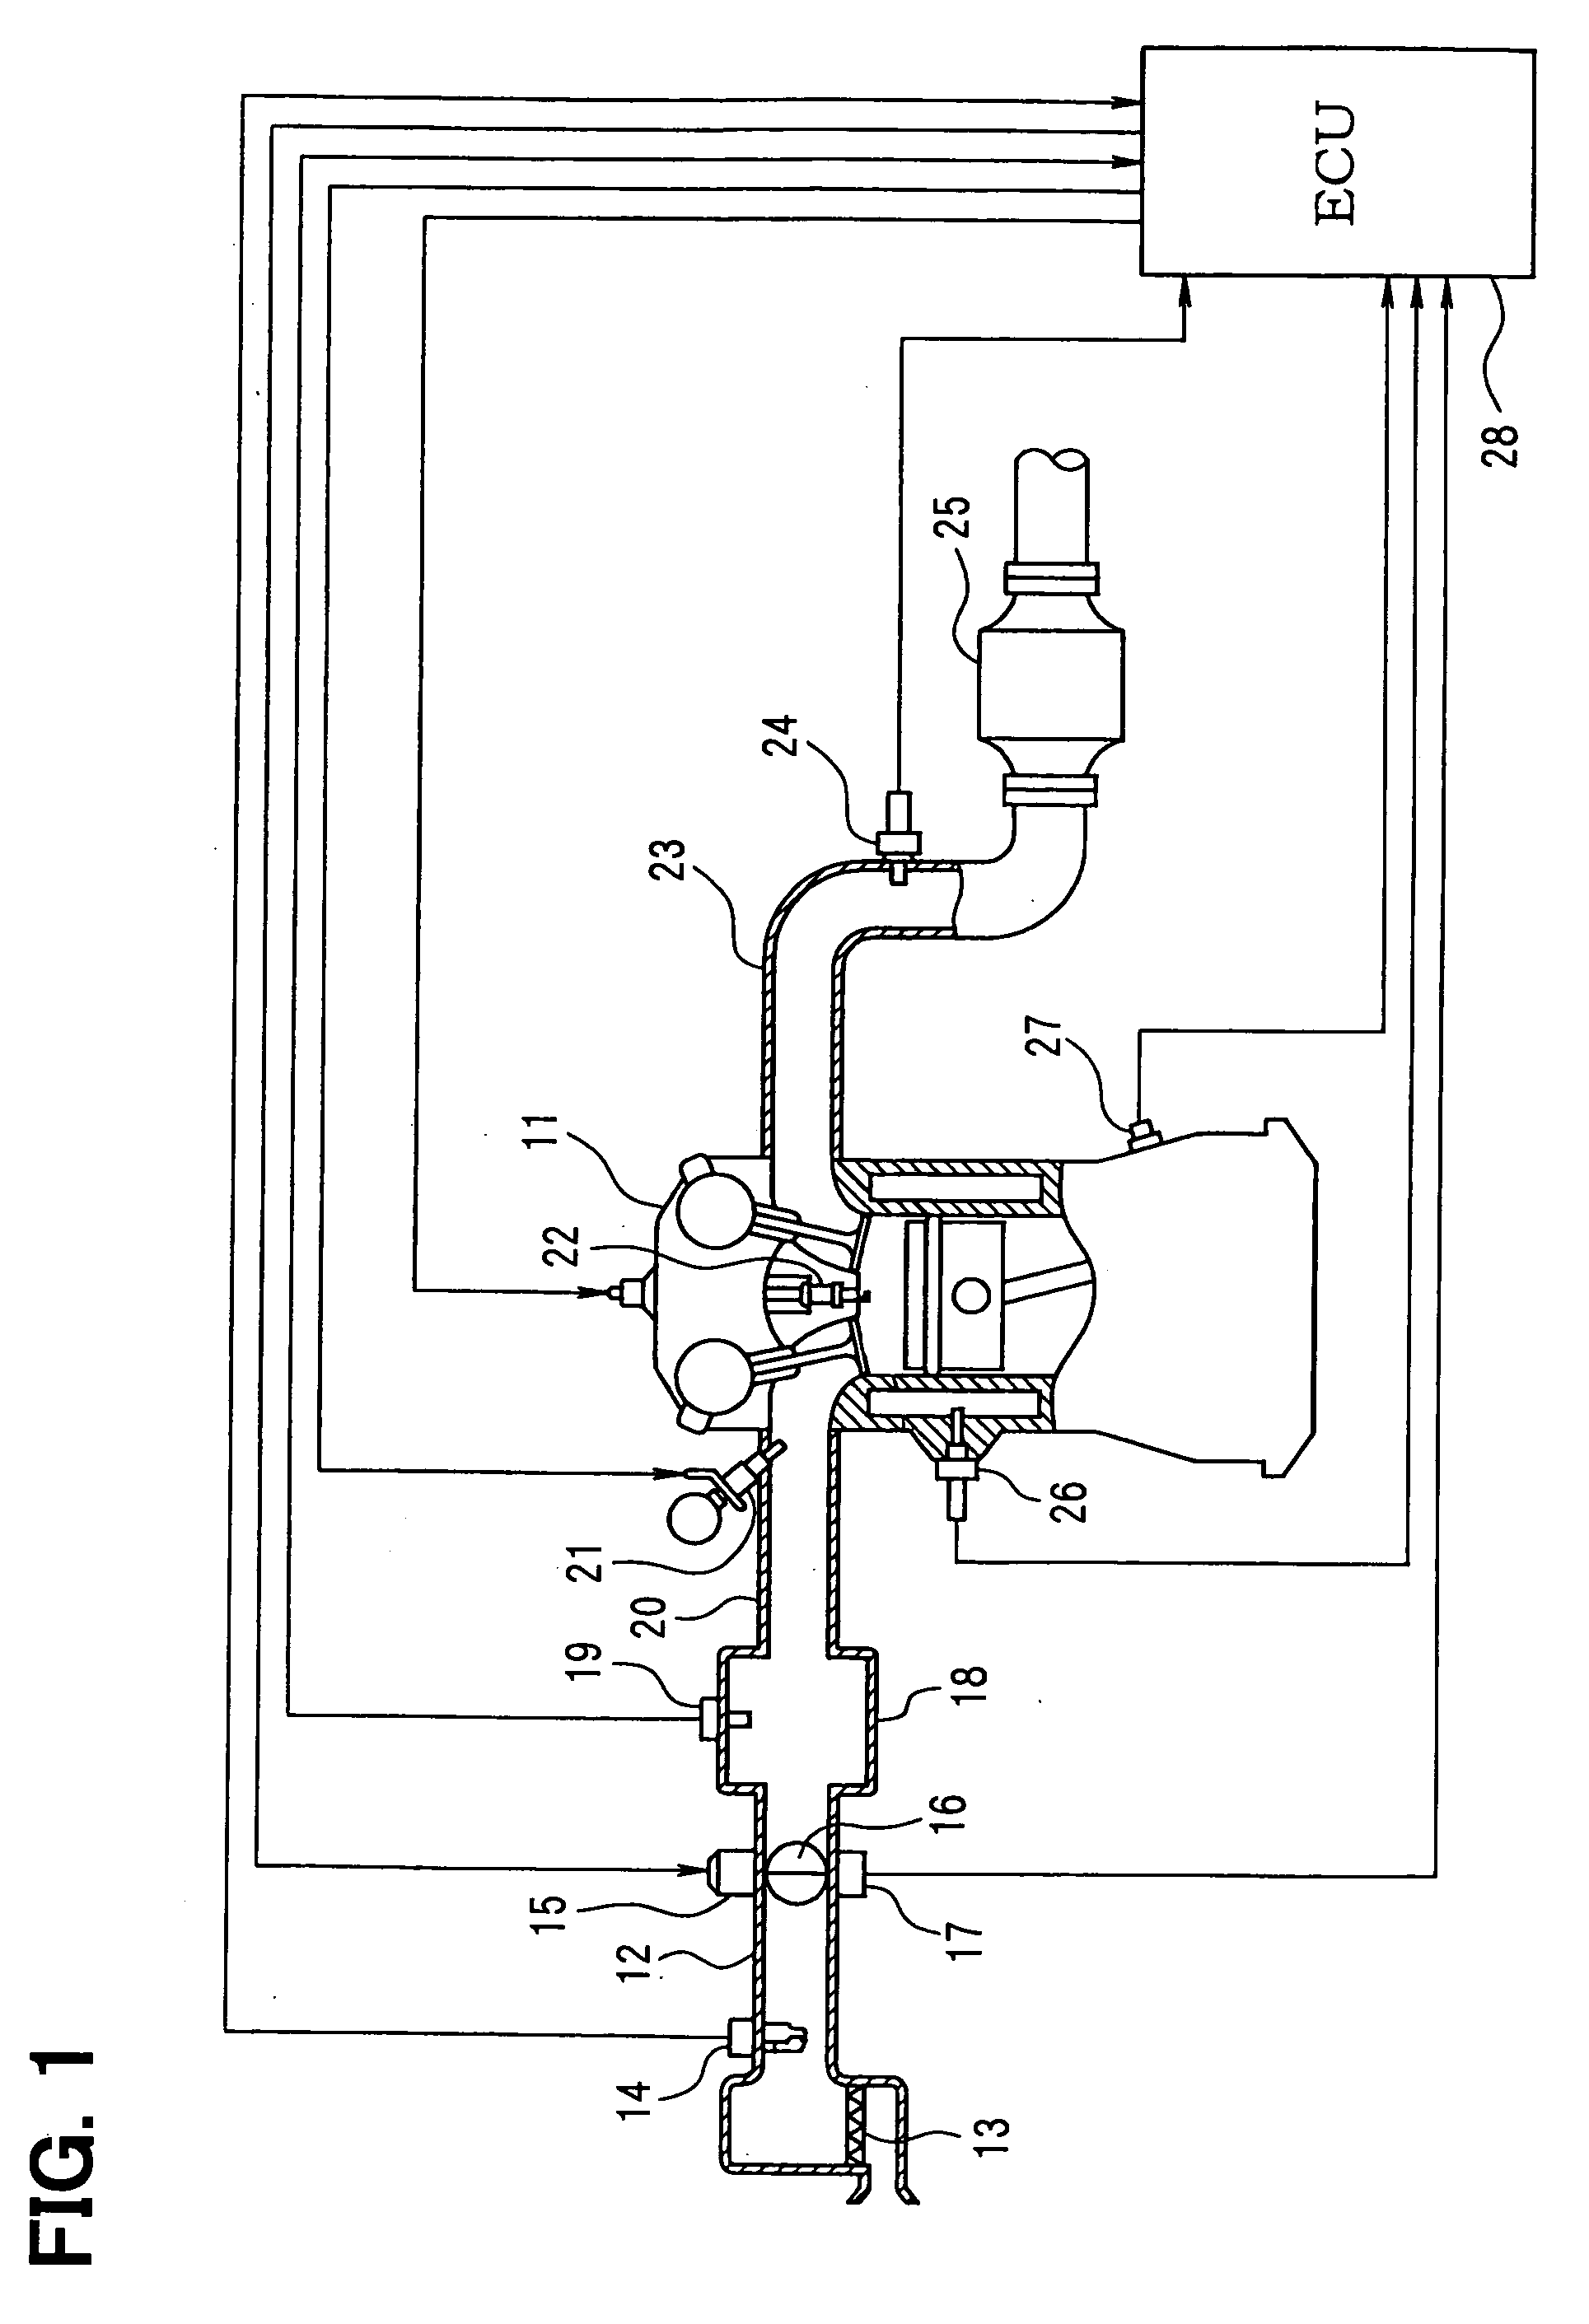 Air-fuel ratio controller for internal combustion engine and diagnosis apparatus for intake sensors